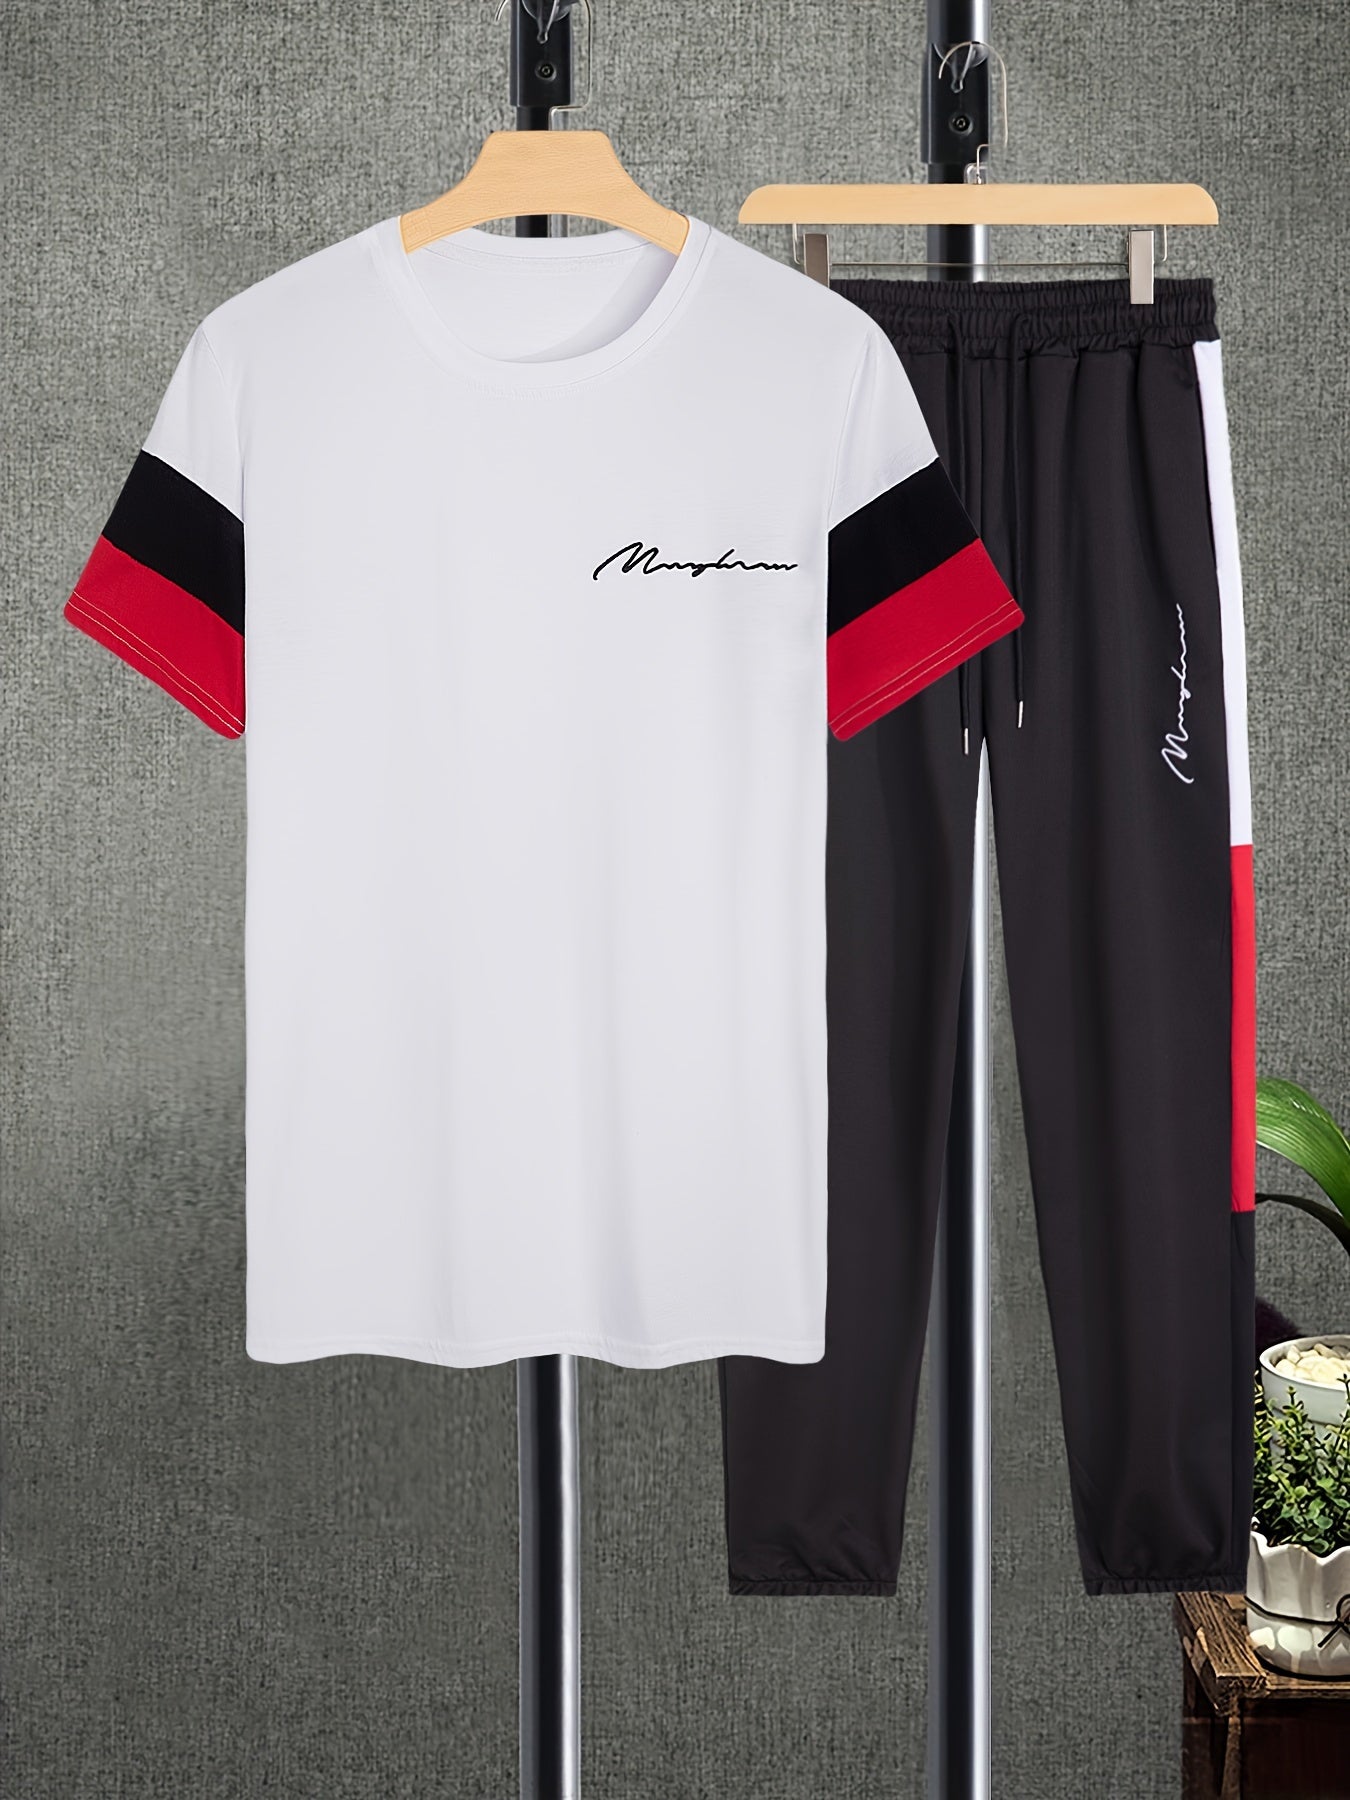 Men's Colorblock Casual T-shirt Outfit Set, 2 Pieces Round Neck Short Sleeve Tees And Drawstring Long Pants